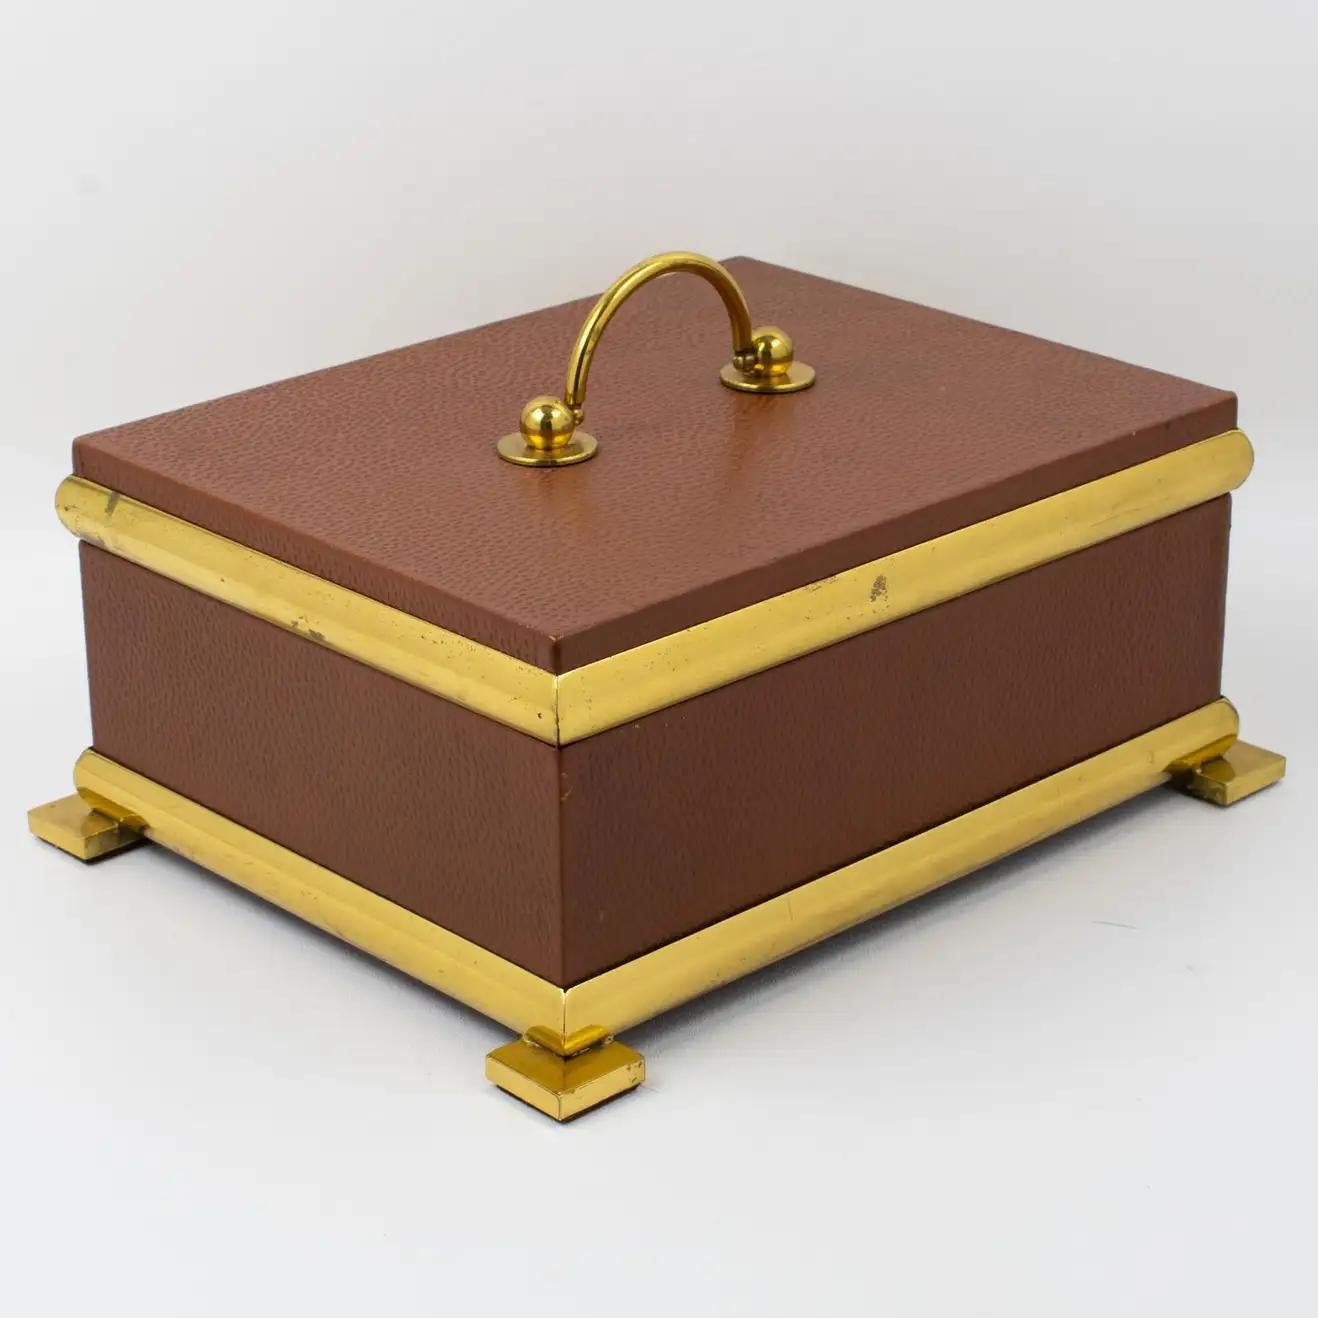 Italian Leather and Brass Decorative Box, 1950s Empire Style For Sale 6